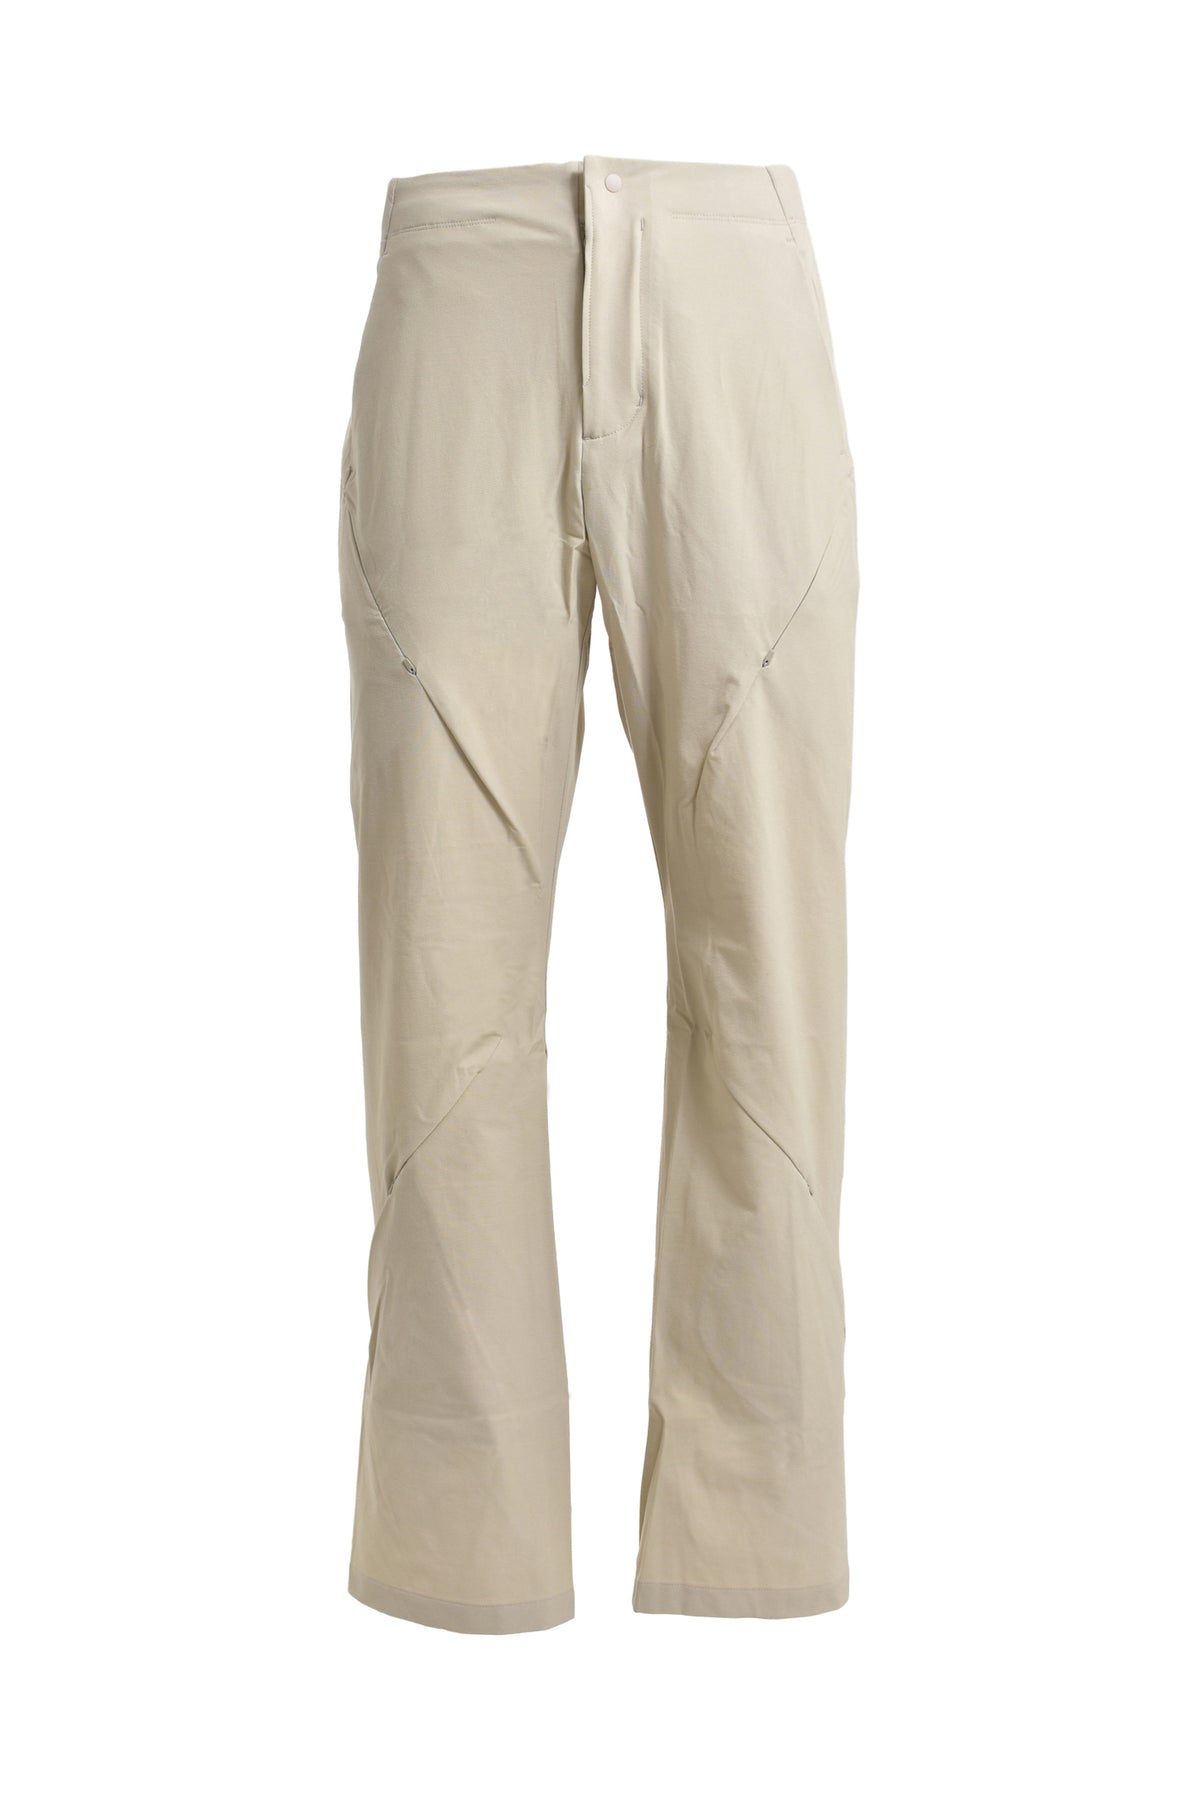 POST ARCHIVE FACTION (PAF) 5.1 TECHNICAL PANTS RIGHT / OAT